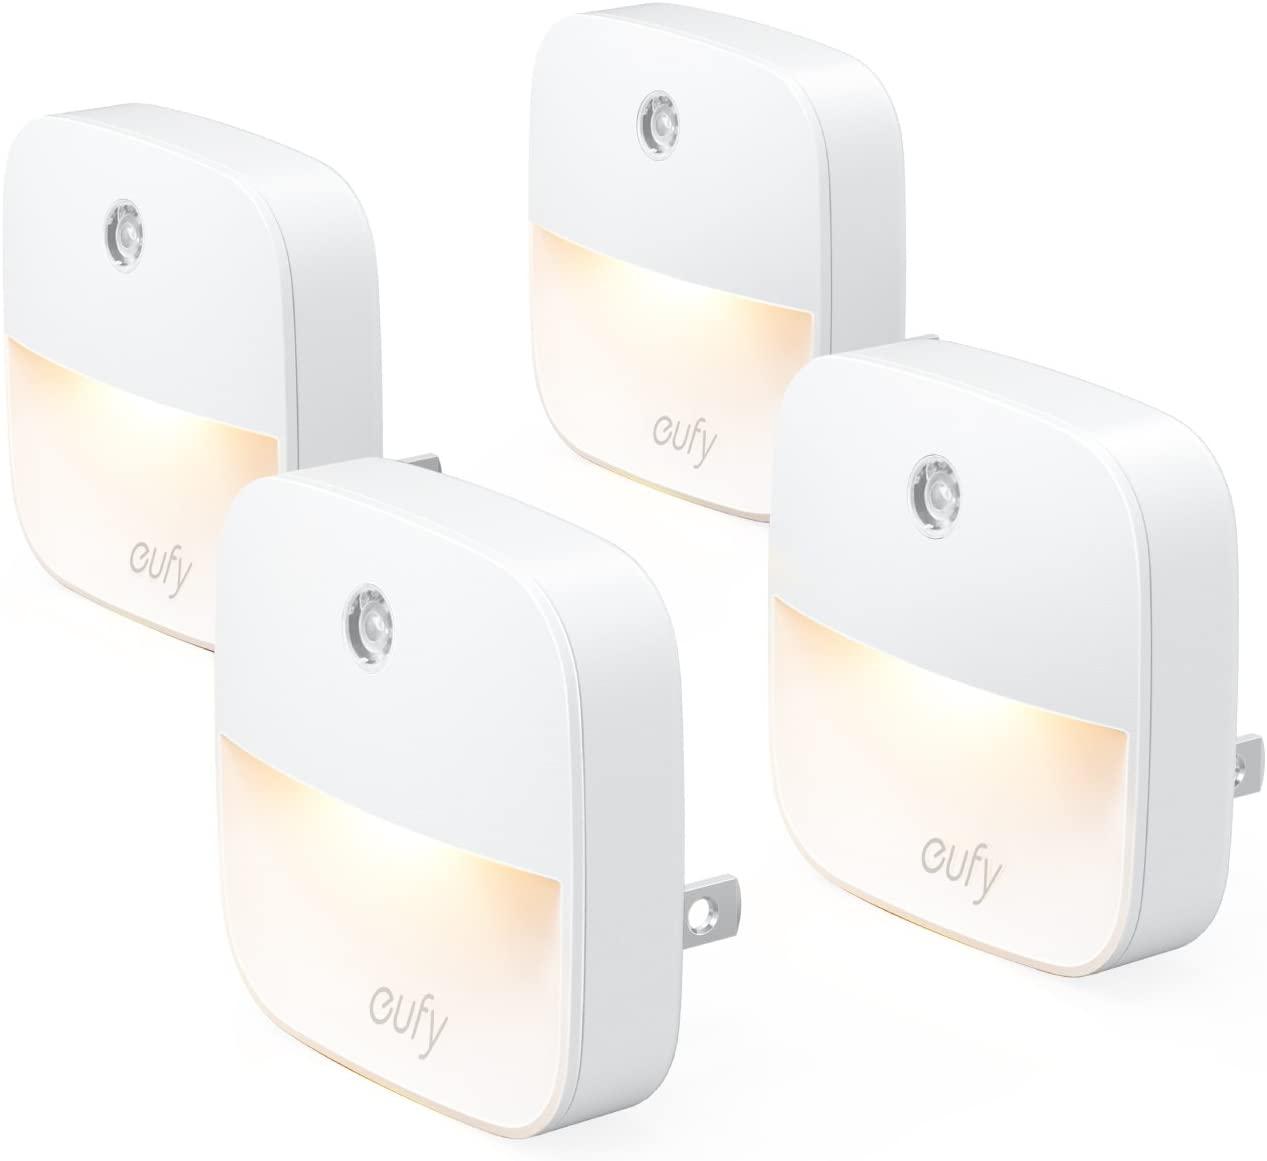 4 eufy by Anker Plug-in Night Lights for $10.79